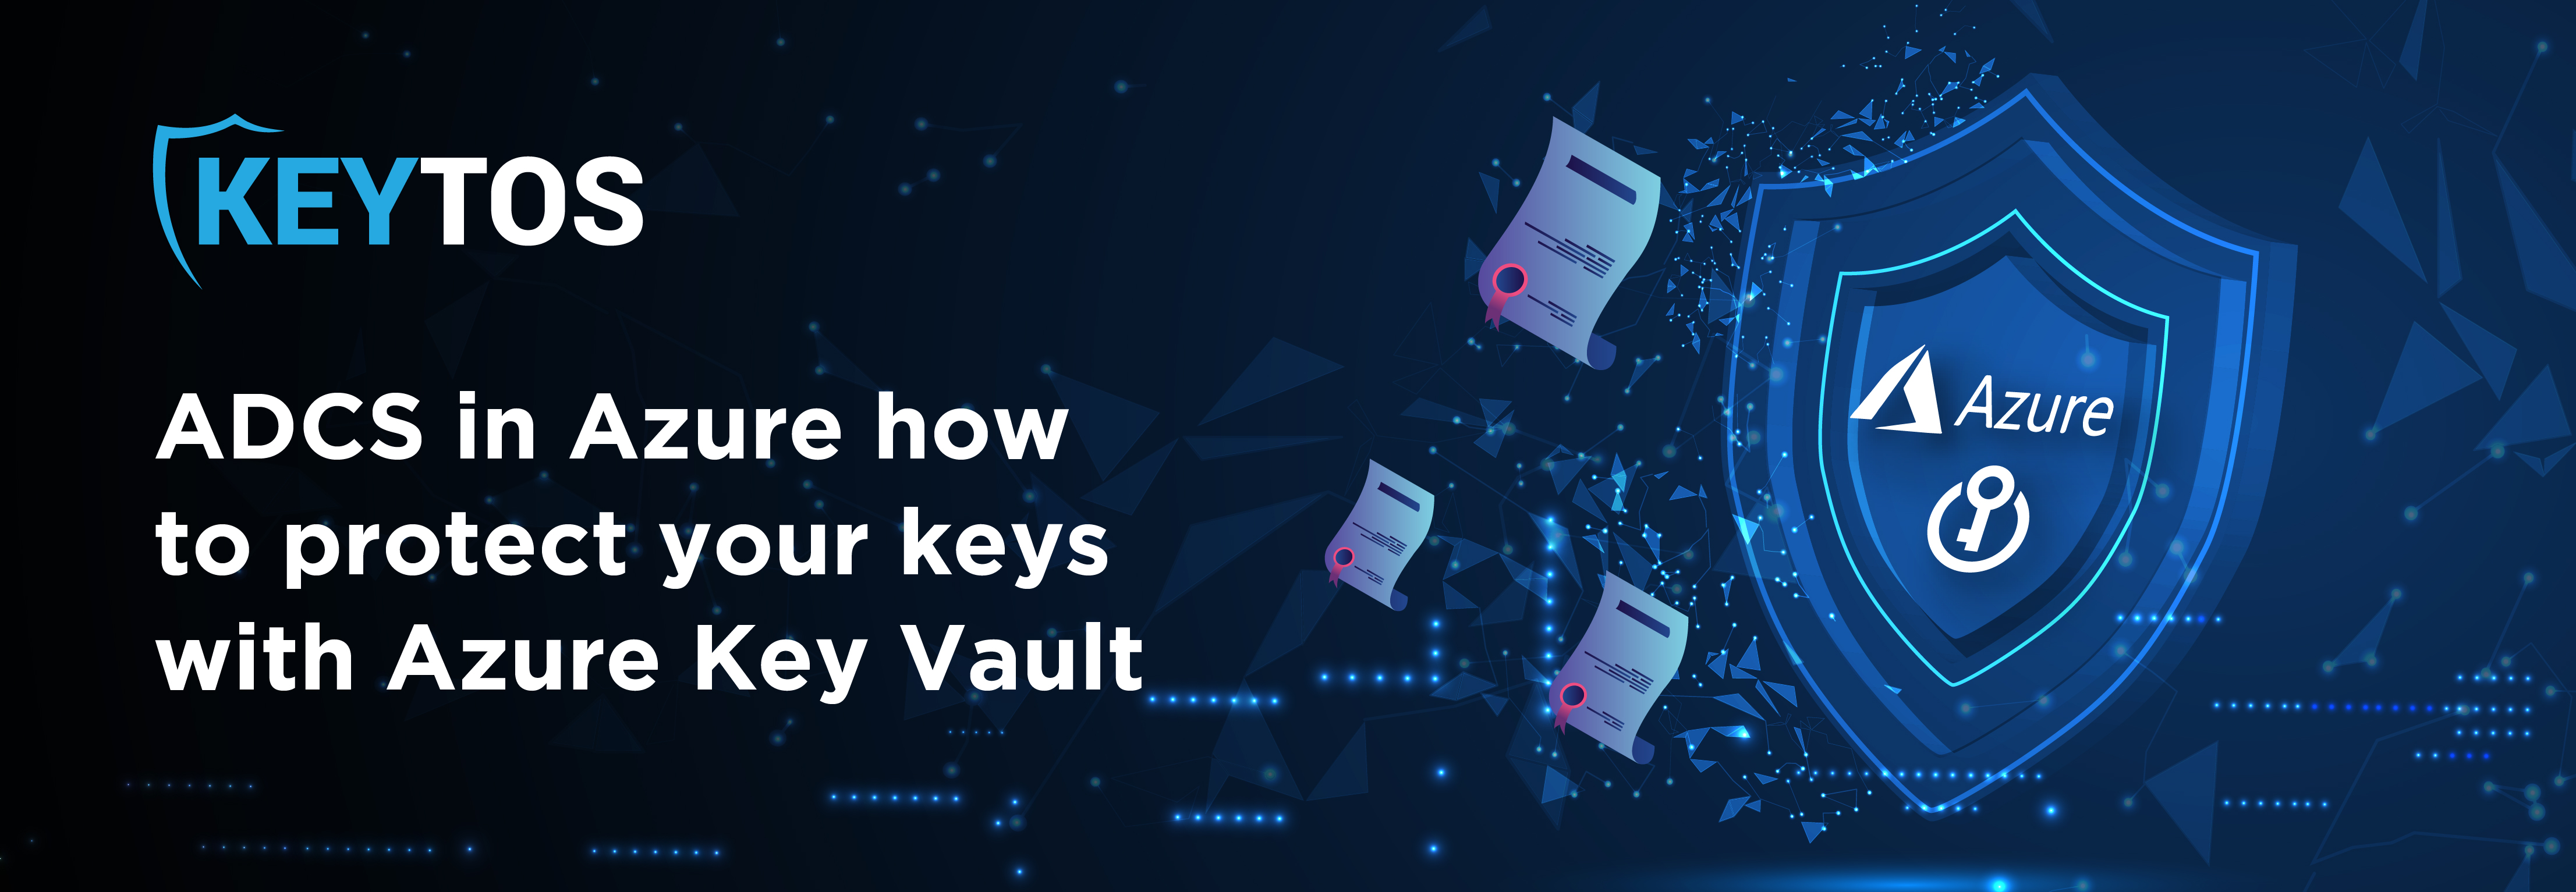 Certificate Authority Azure Key Vault. ADCS in Azure - How to protect your Private Keys with Azure Key Vault or dedicated HSM.